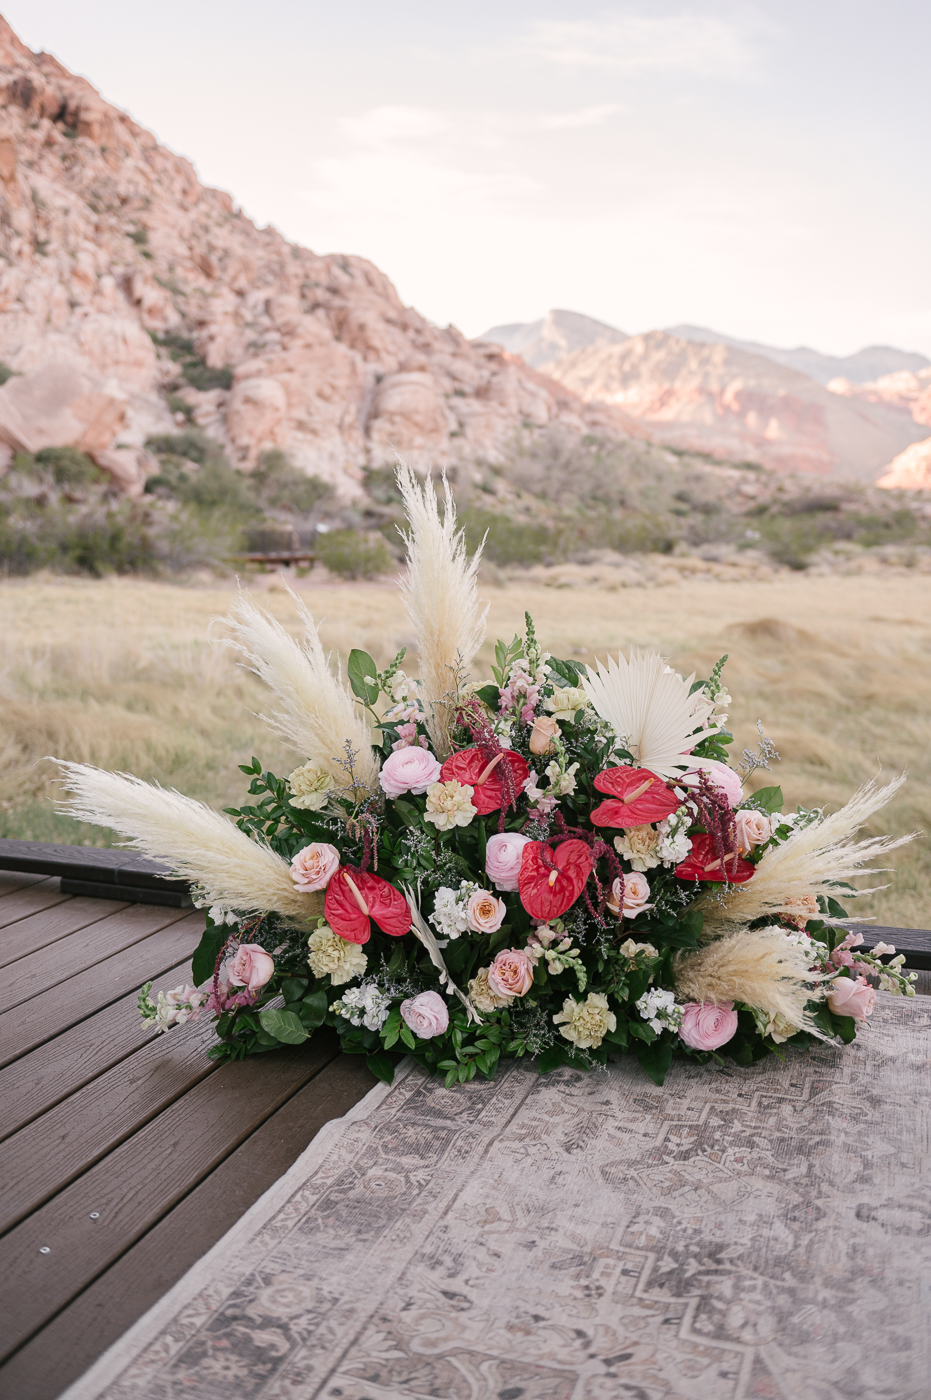 The Top All Inclusive Elopement Packages: Beautiful floral arrangement with view of mountain behind it.